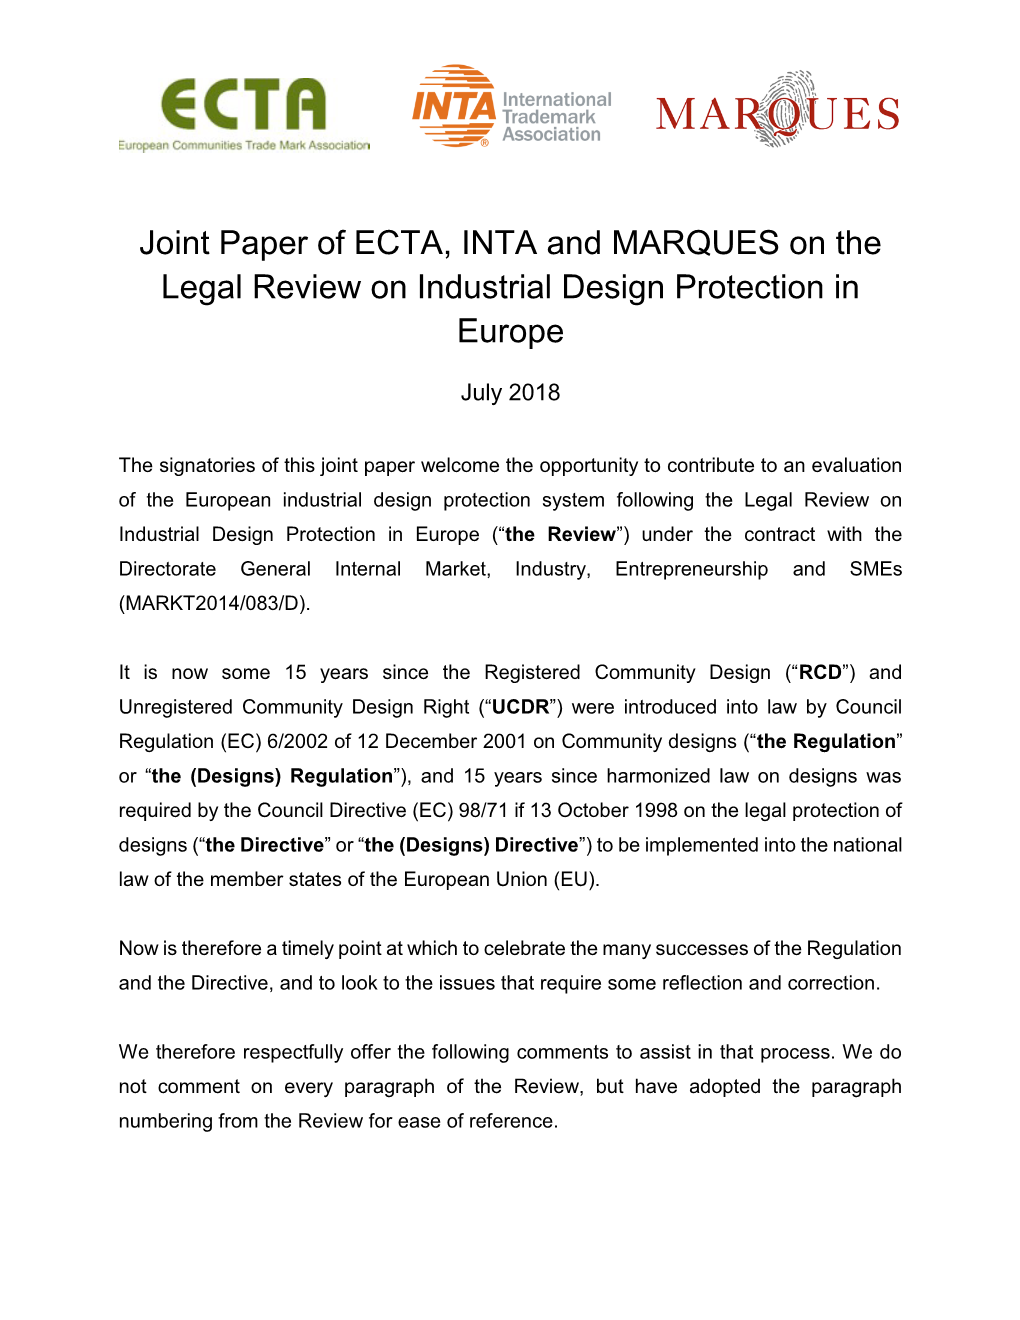 Joint Paper of ECTA, INTA and MARQUES on the Legal Review on Industrial Design Protection in Europe